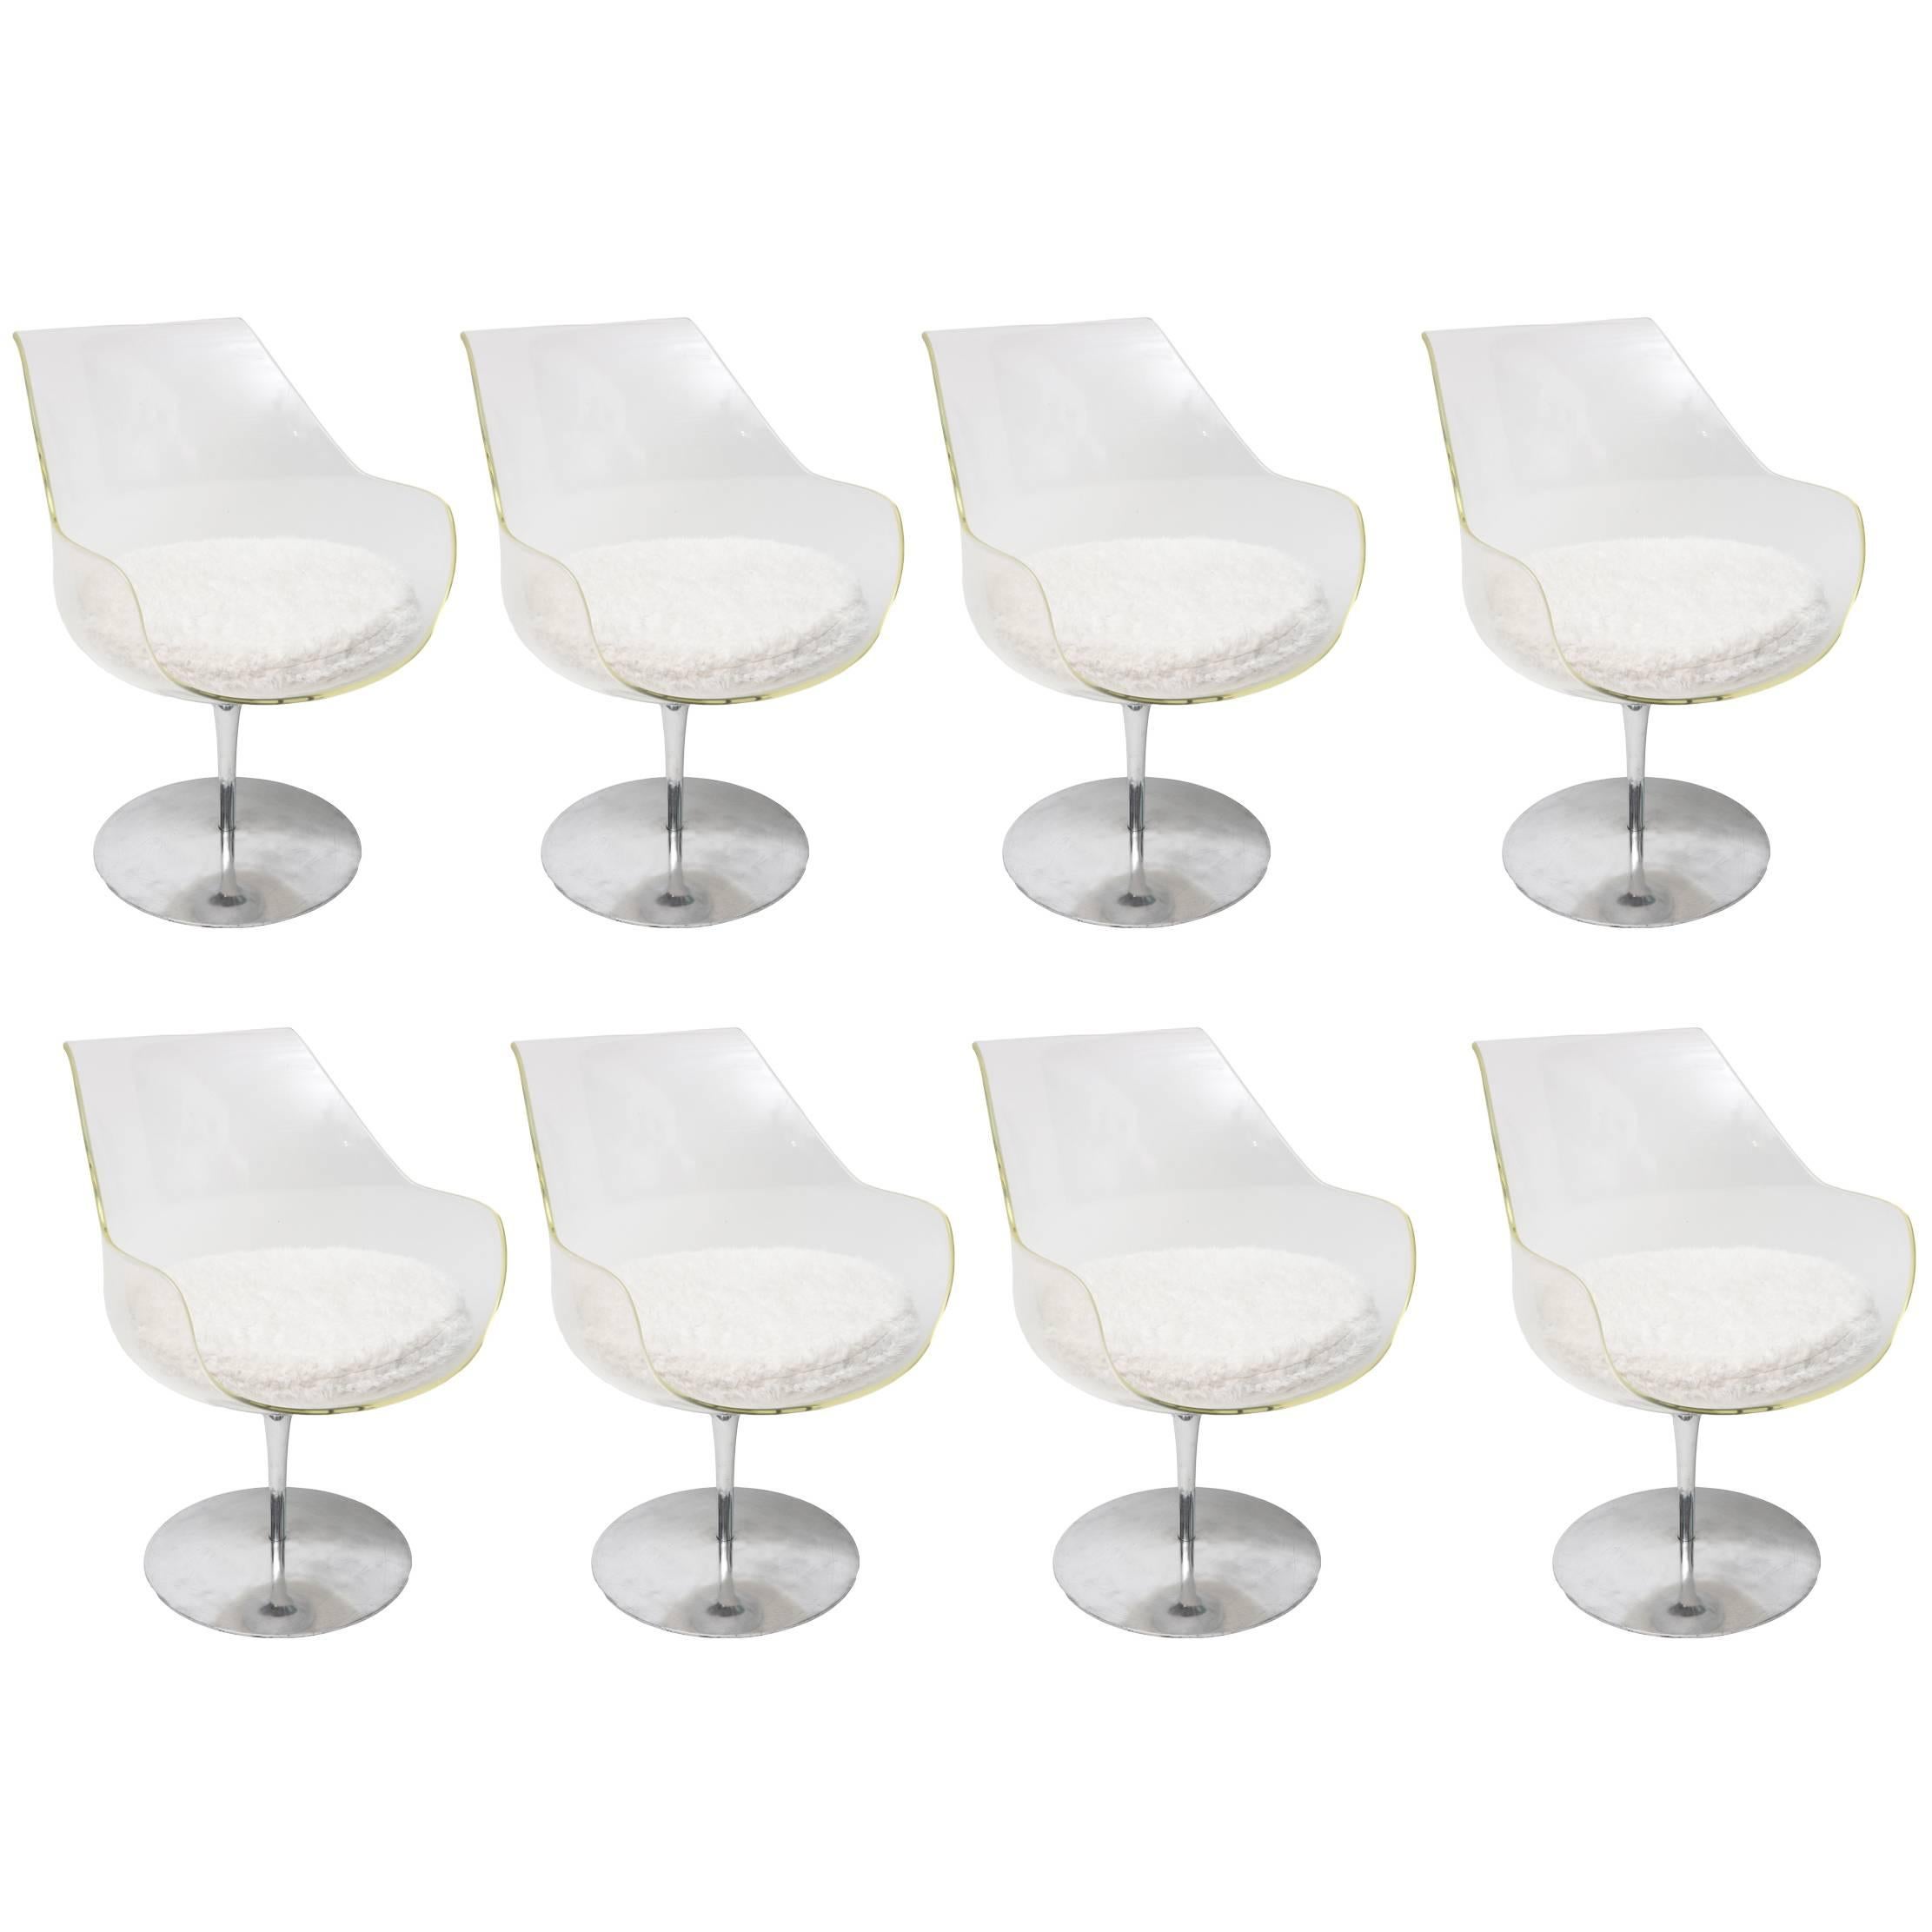 Erwine and Estelle Laverne Champagne Chairs